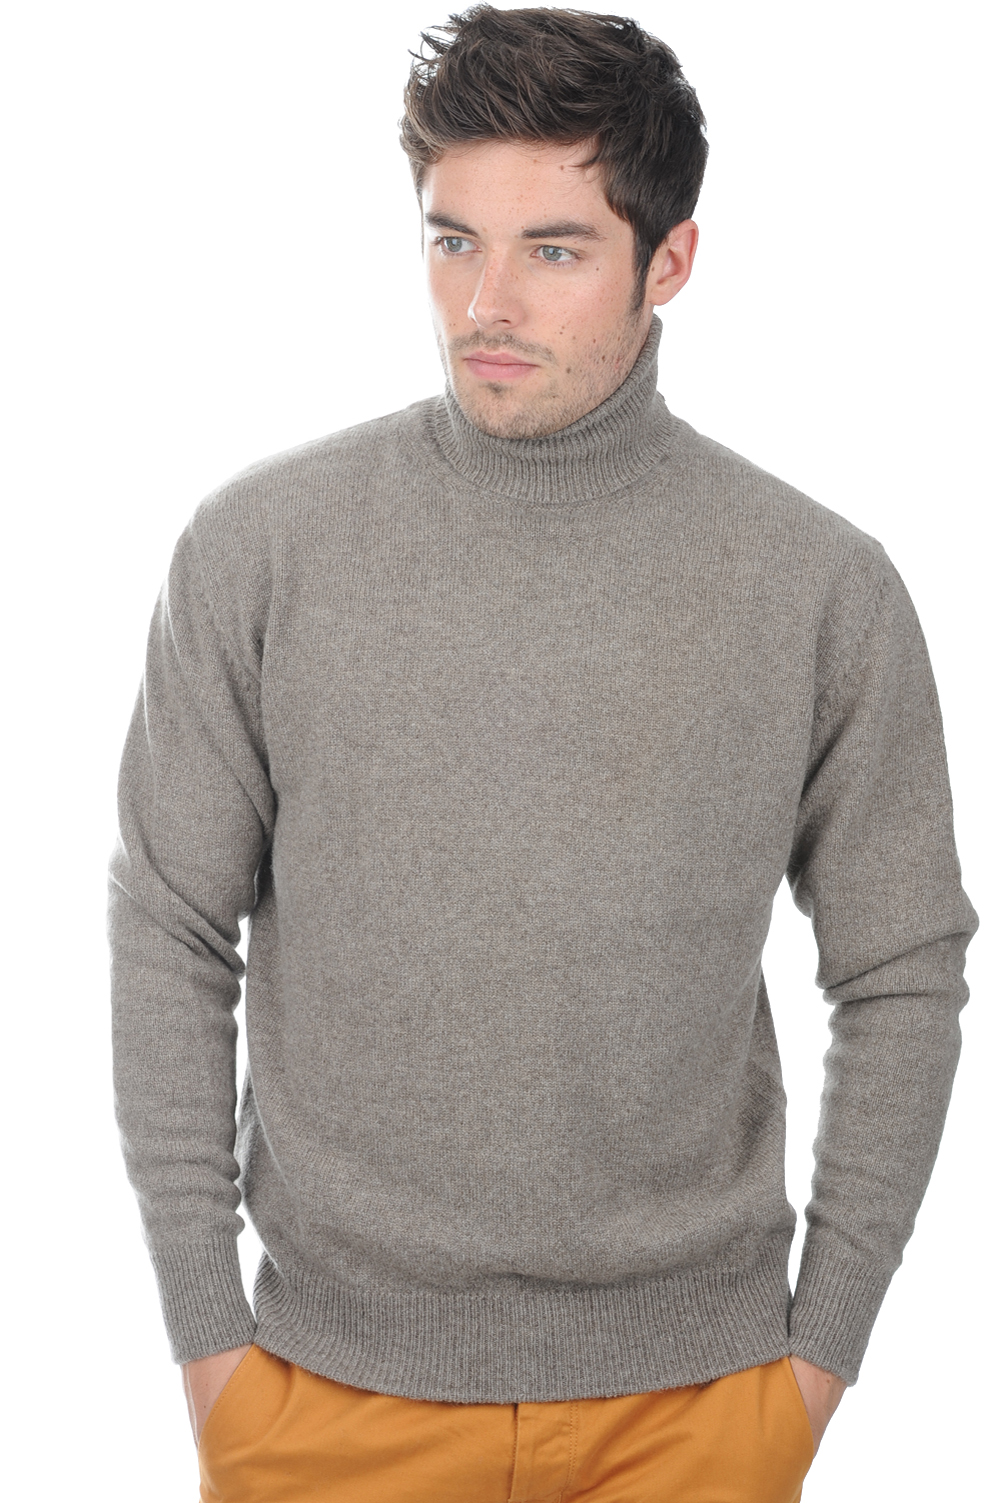 Yak pull homme col roule yakedgar marmotte naturel 4xl